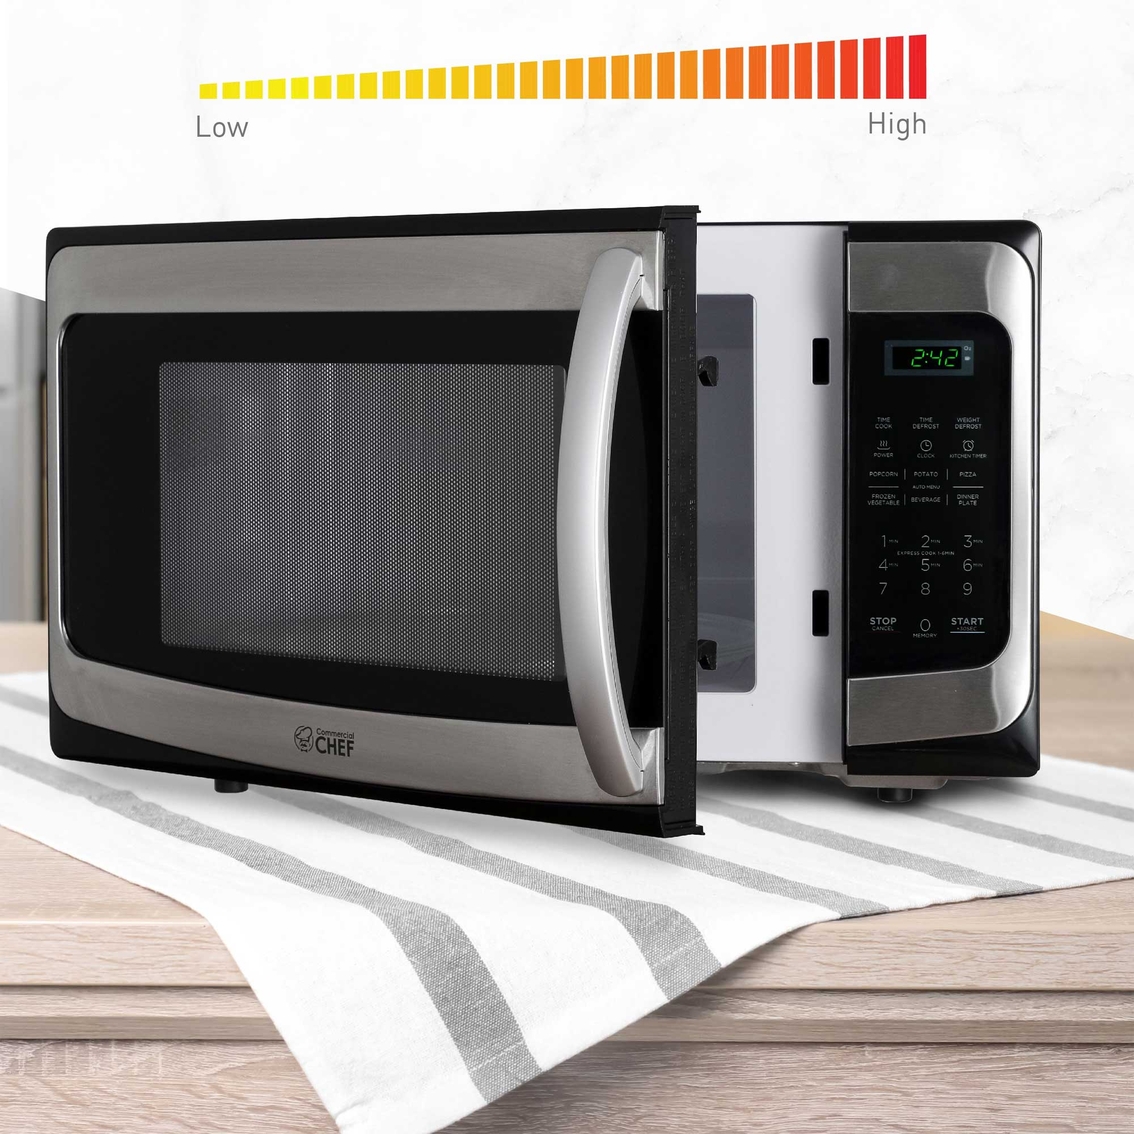 Commercial Chef 1.1 cu. ft. Countertop Microwave Oven - Image 3 of 7